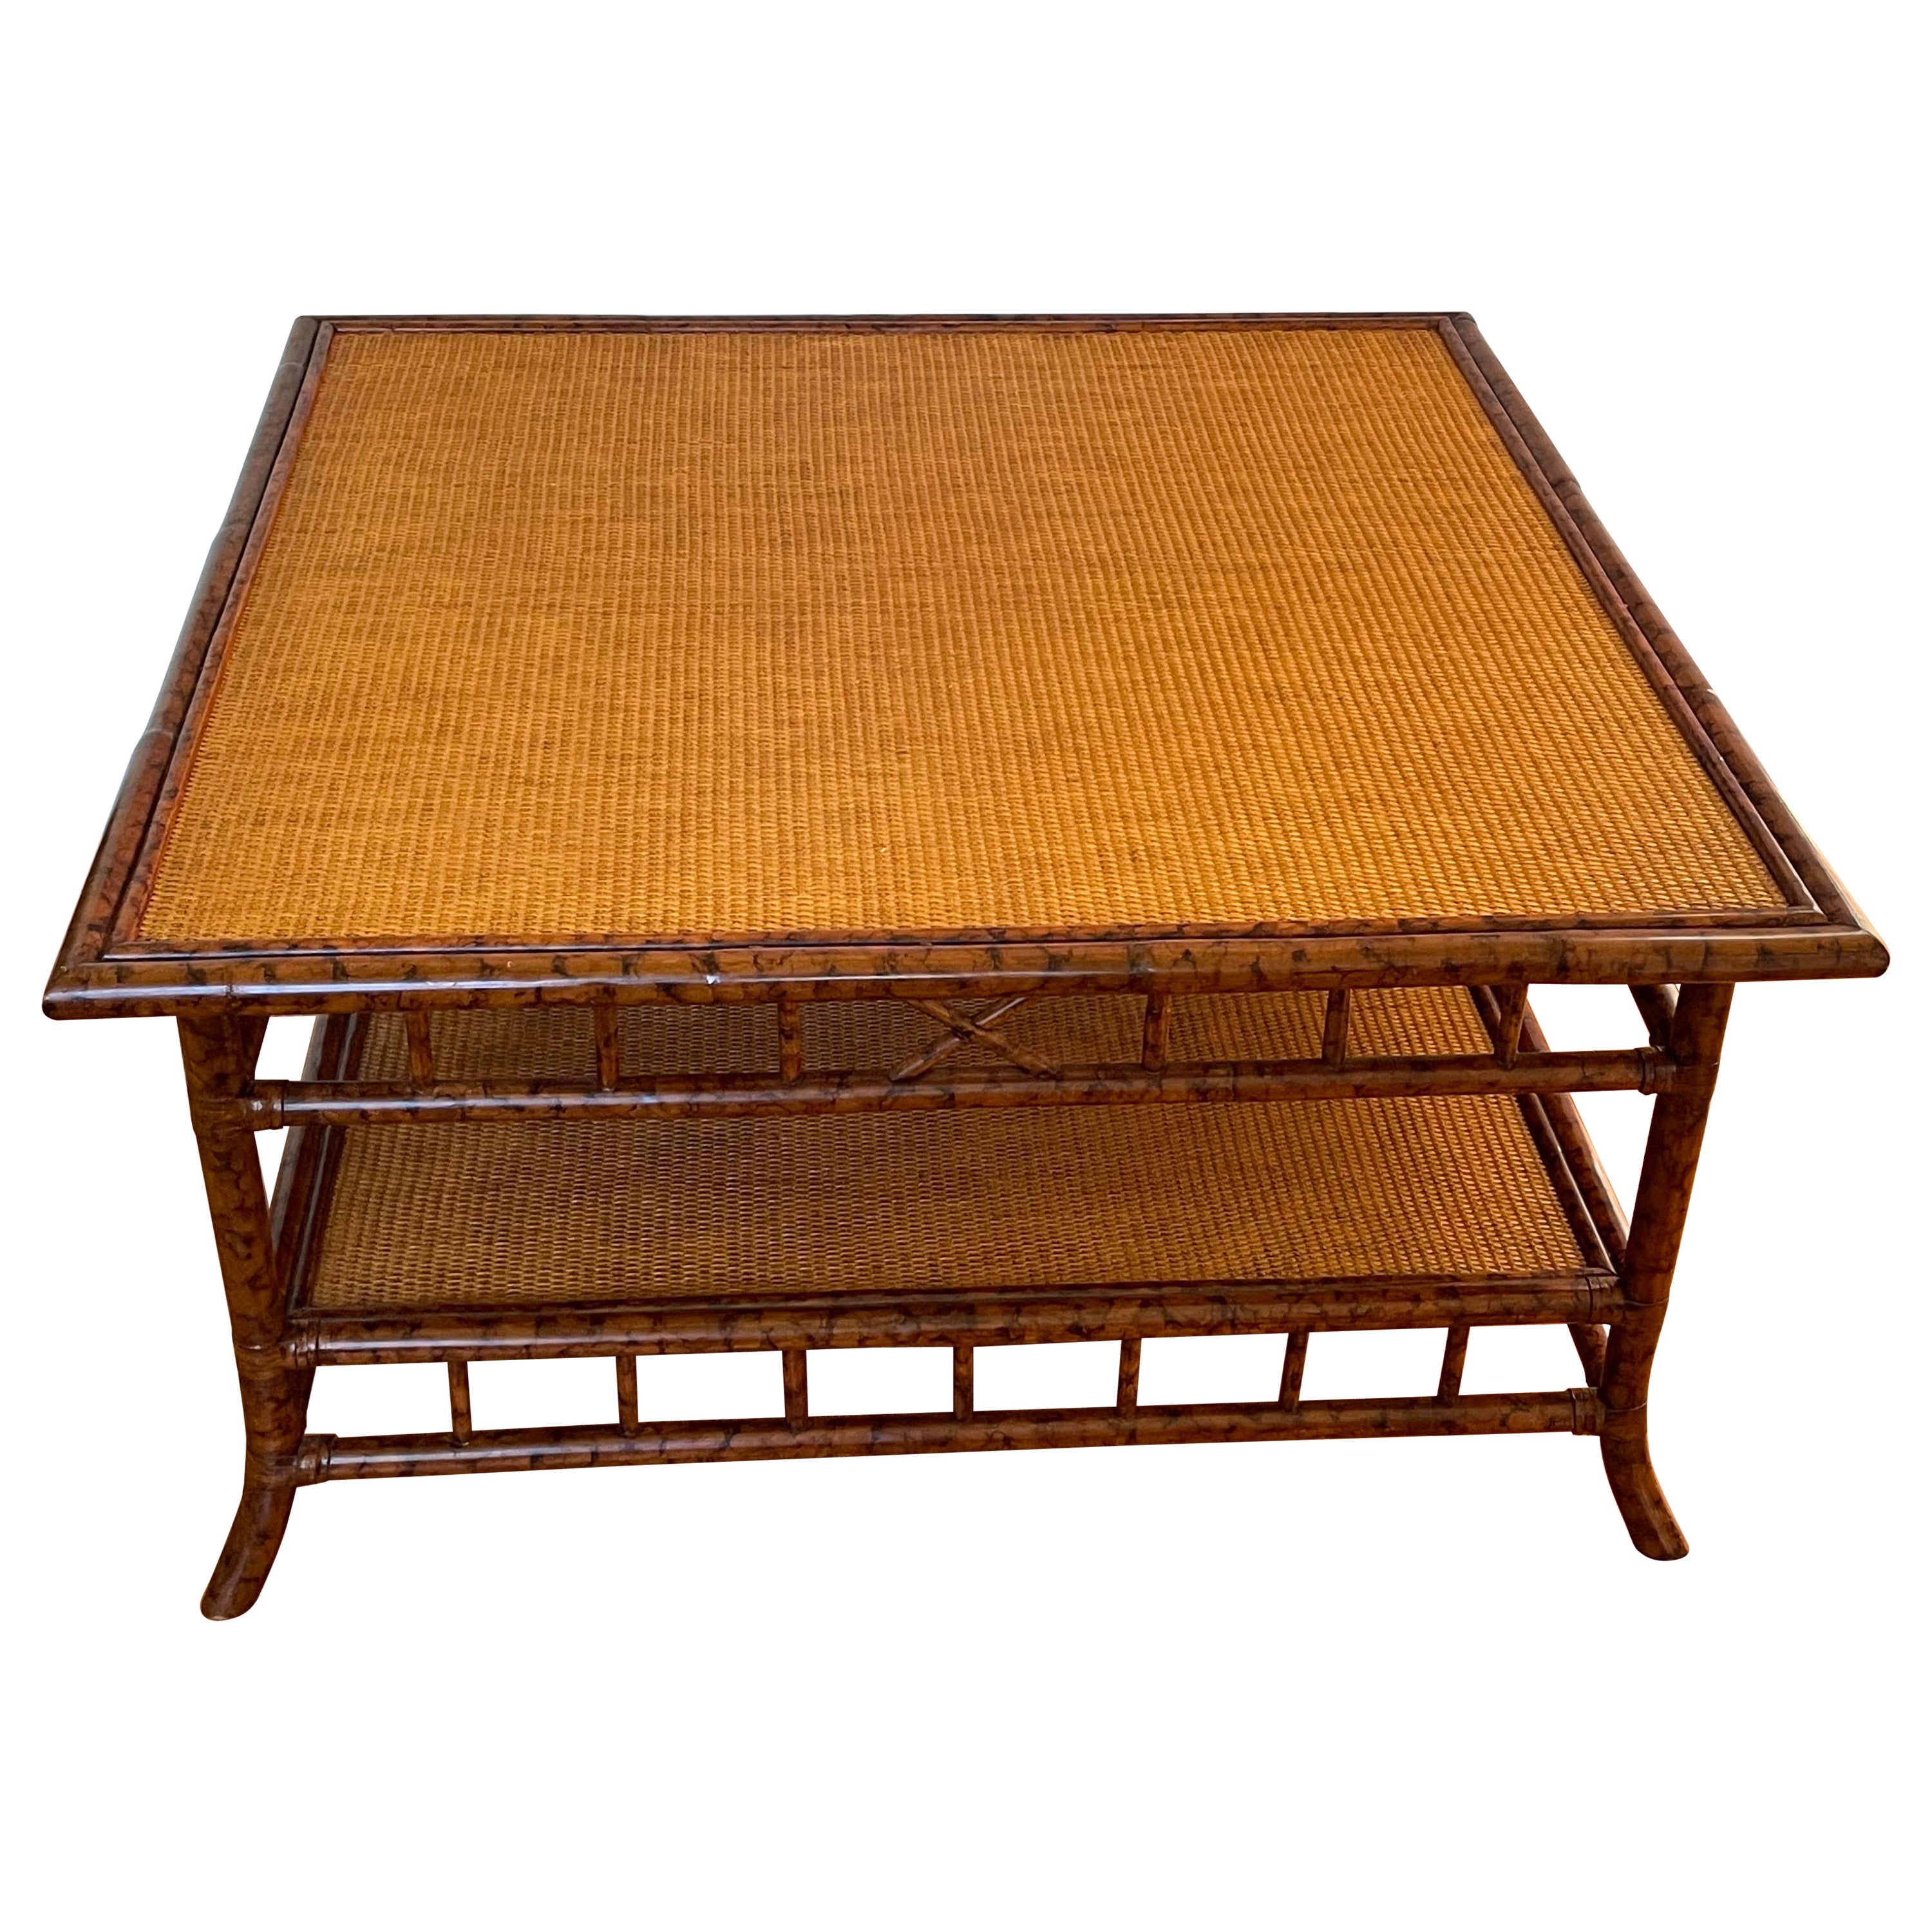 British Colonial Faux Bamboo and Grass Cloth Square Coffee Table For Sale